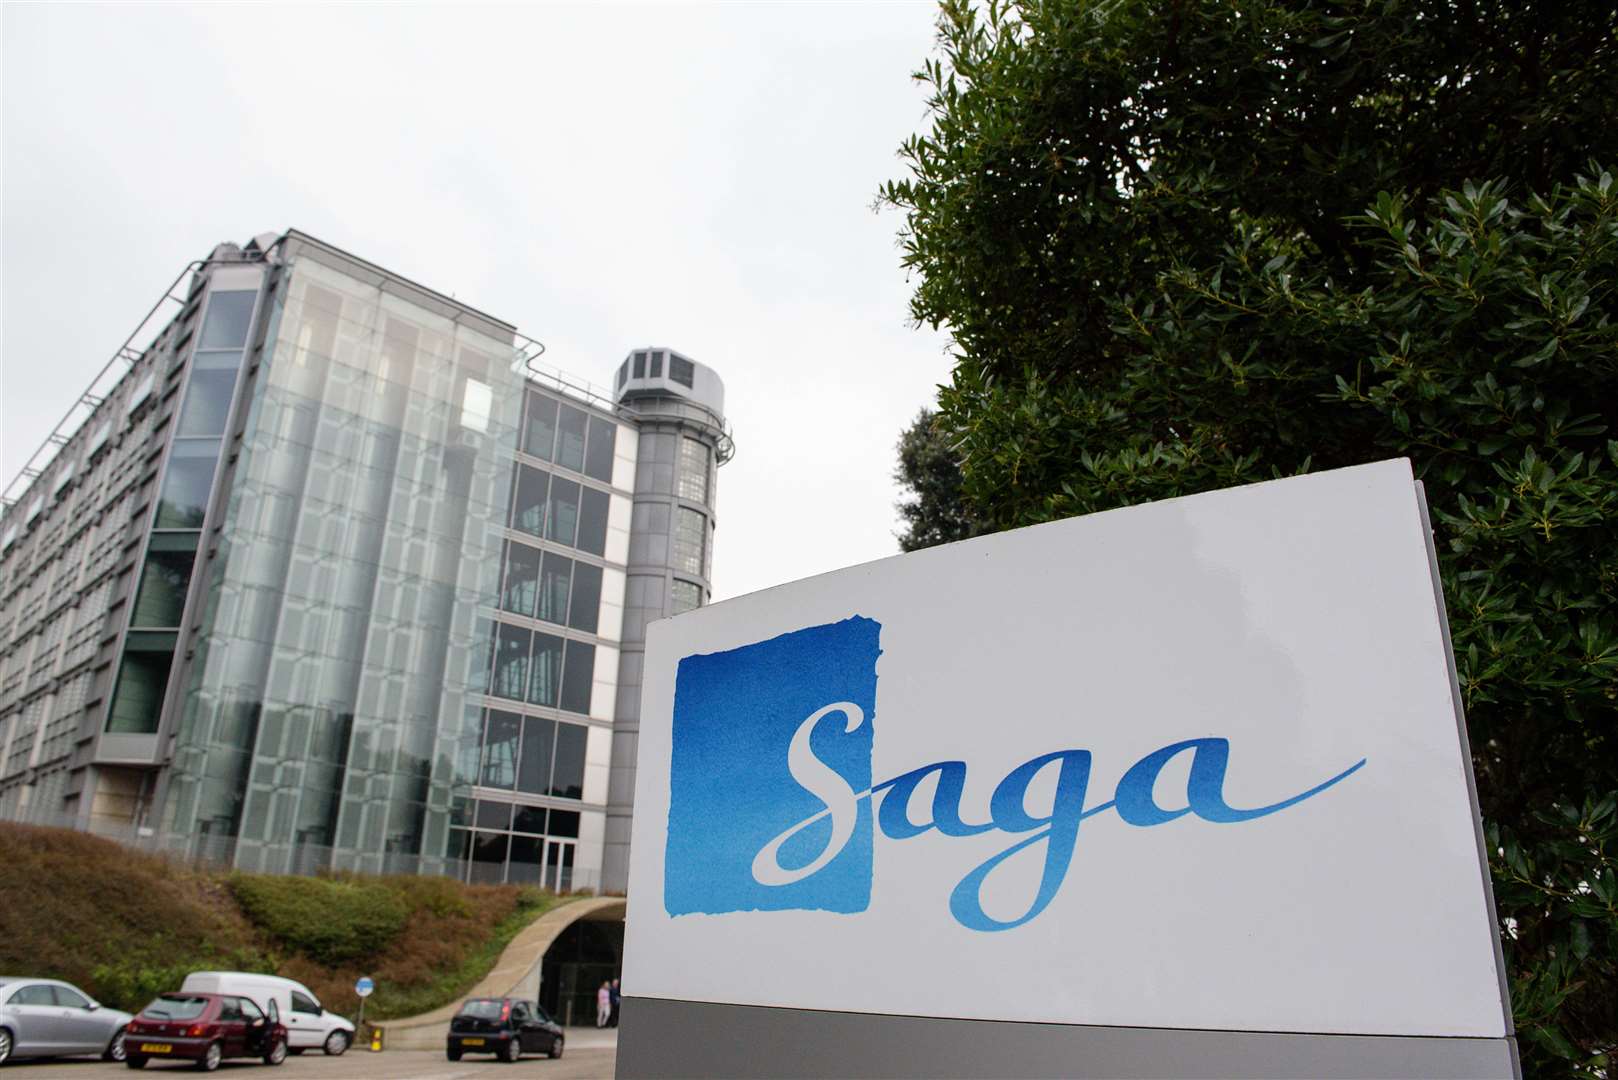 Saga remains one of the county's biggest employers